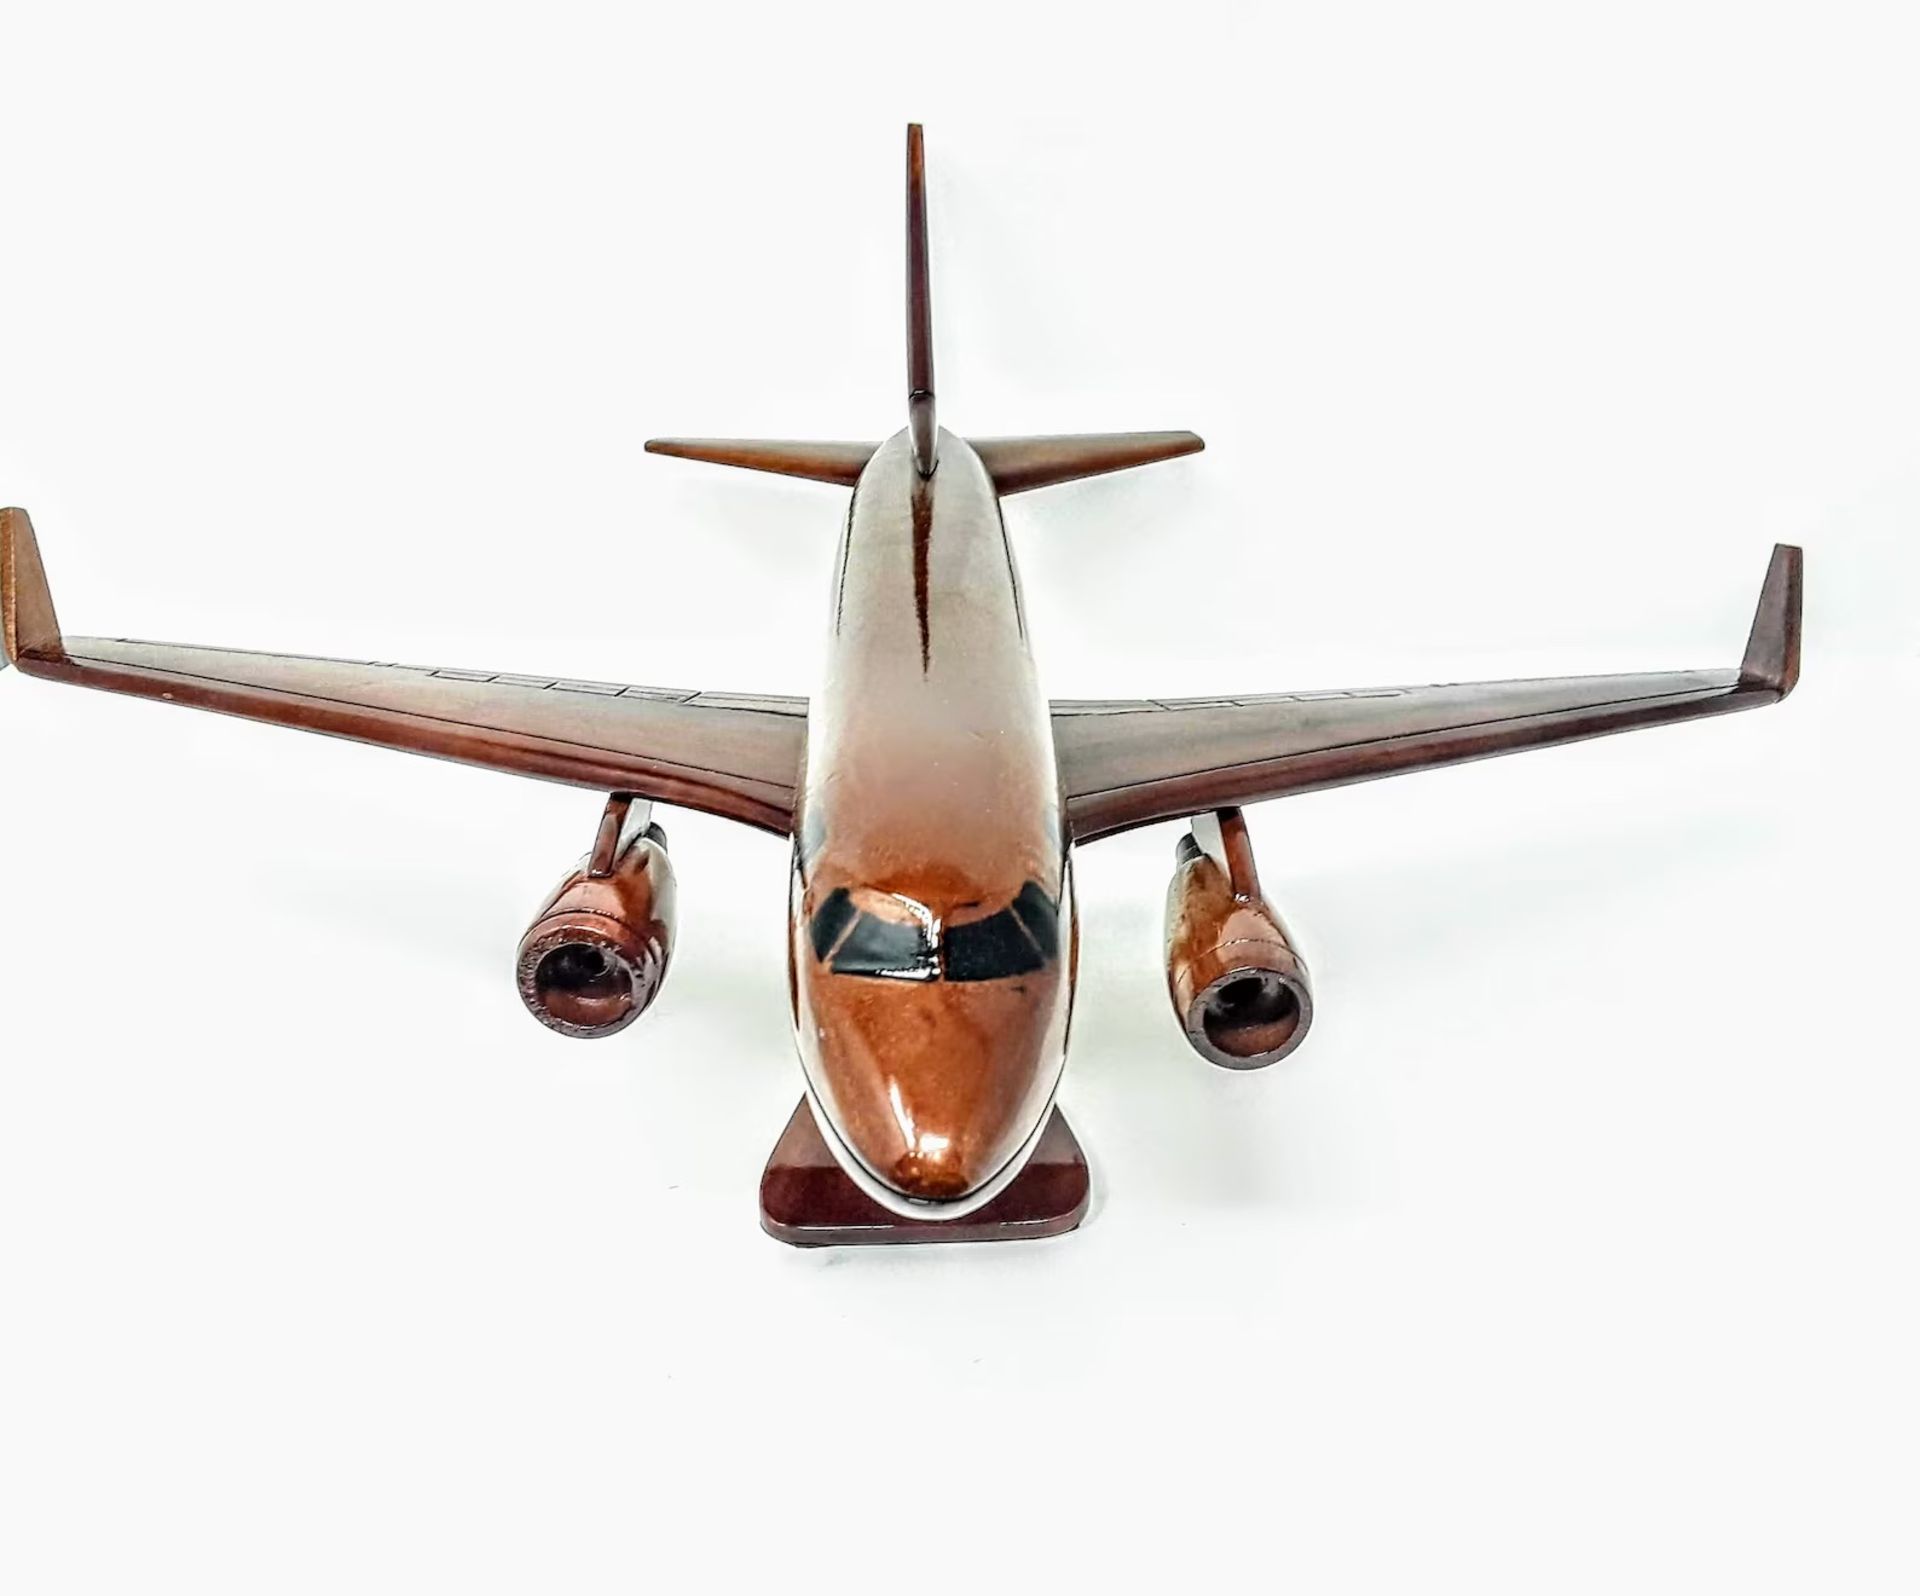 Boeing 737 Wooden Scale Desk Display - Image 4 of 4